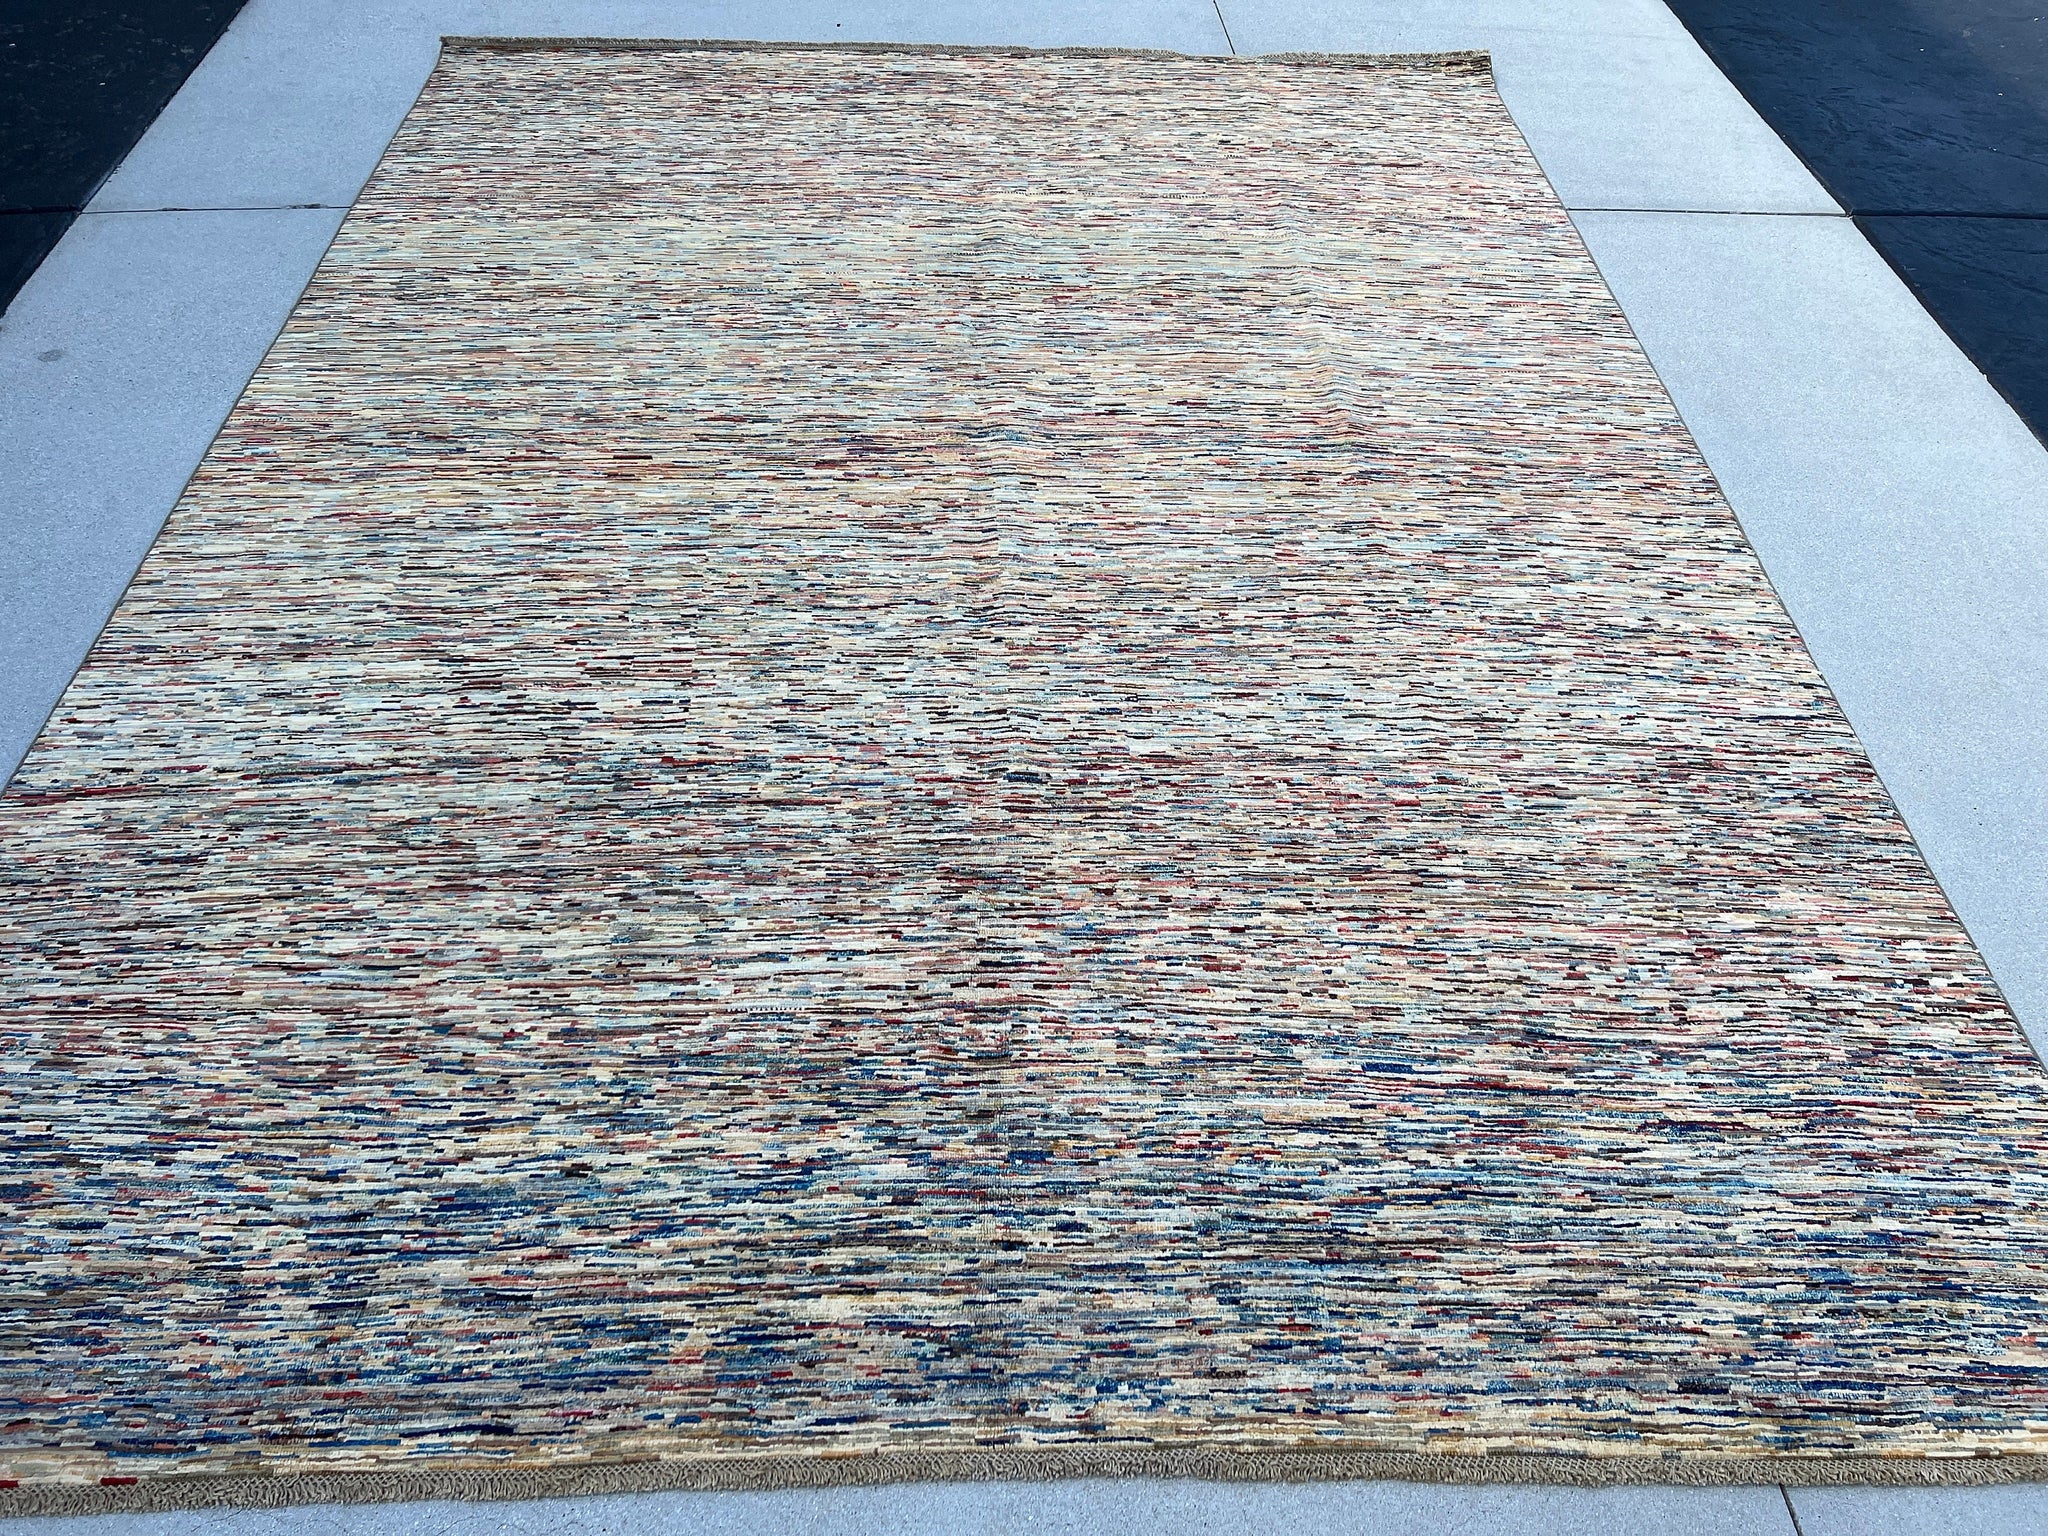 9x11 (270x300) Handmade Afghan Rug | Colorful Teal Brick Red Cream Black Burnt Orange | Wool Abstract Multicolor Striped Hand Knotted